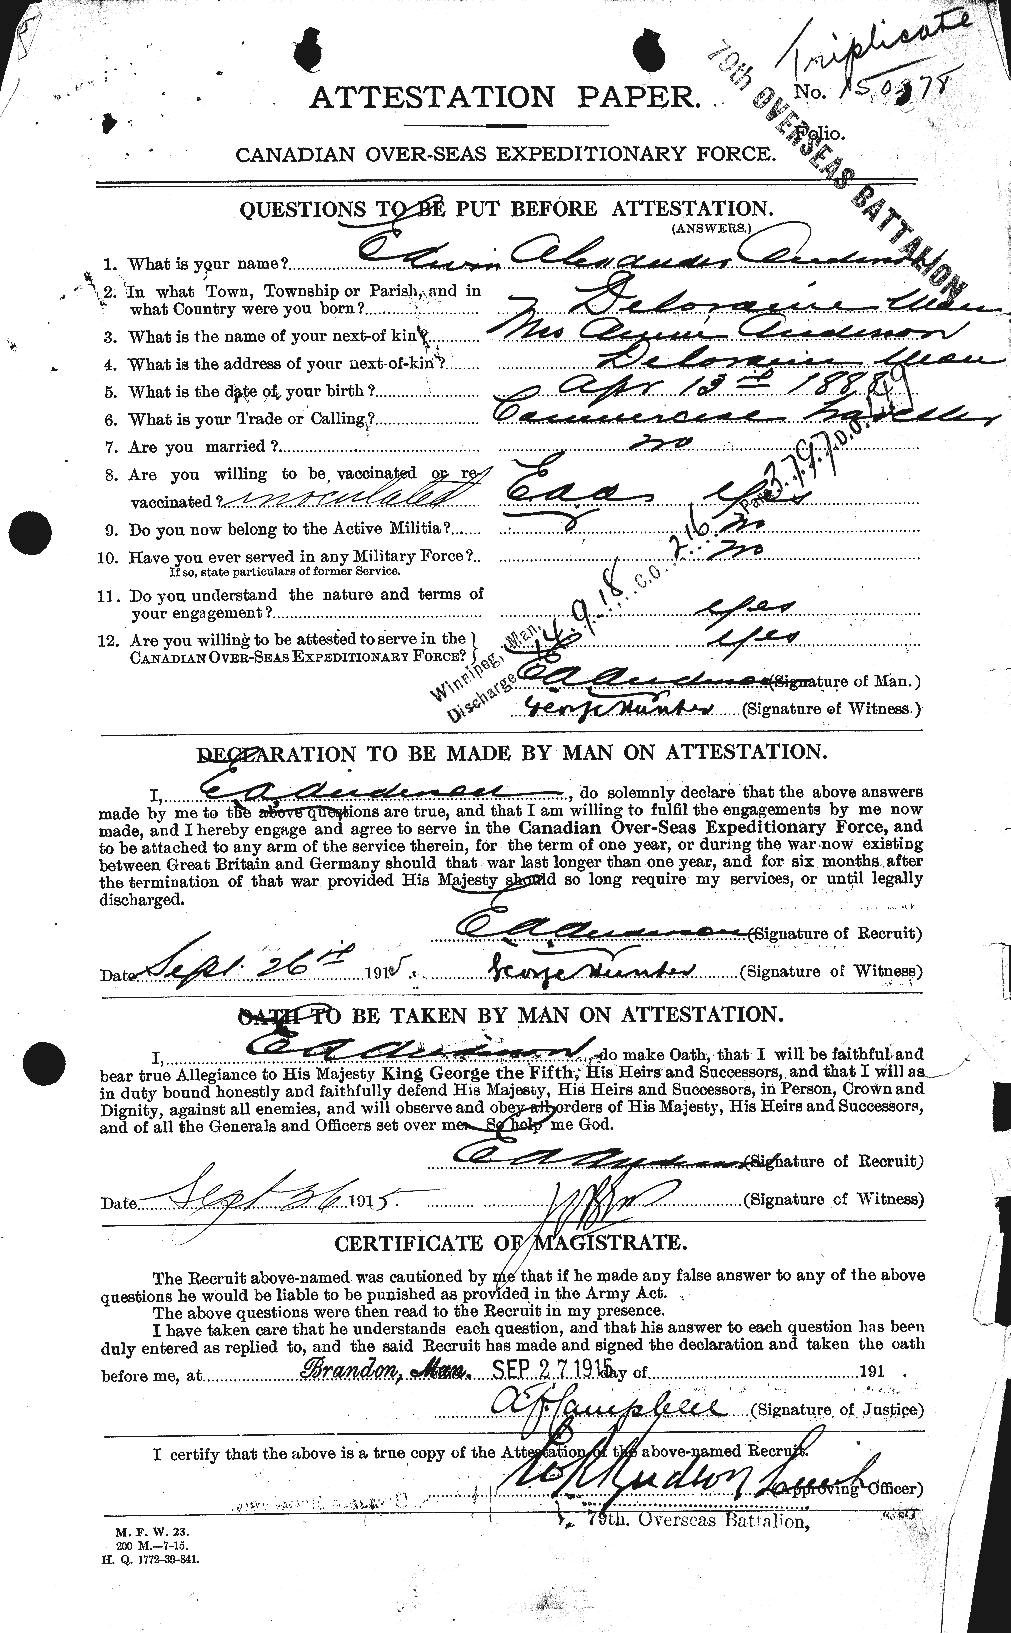 Personnel Records of the First World War - CEF 209948a